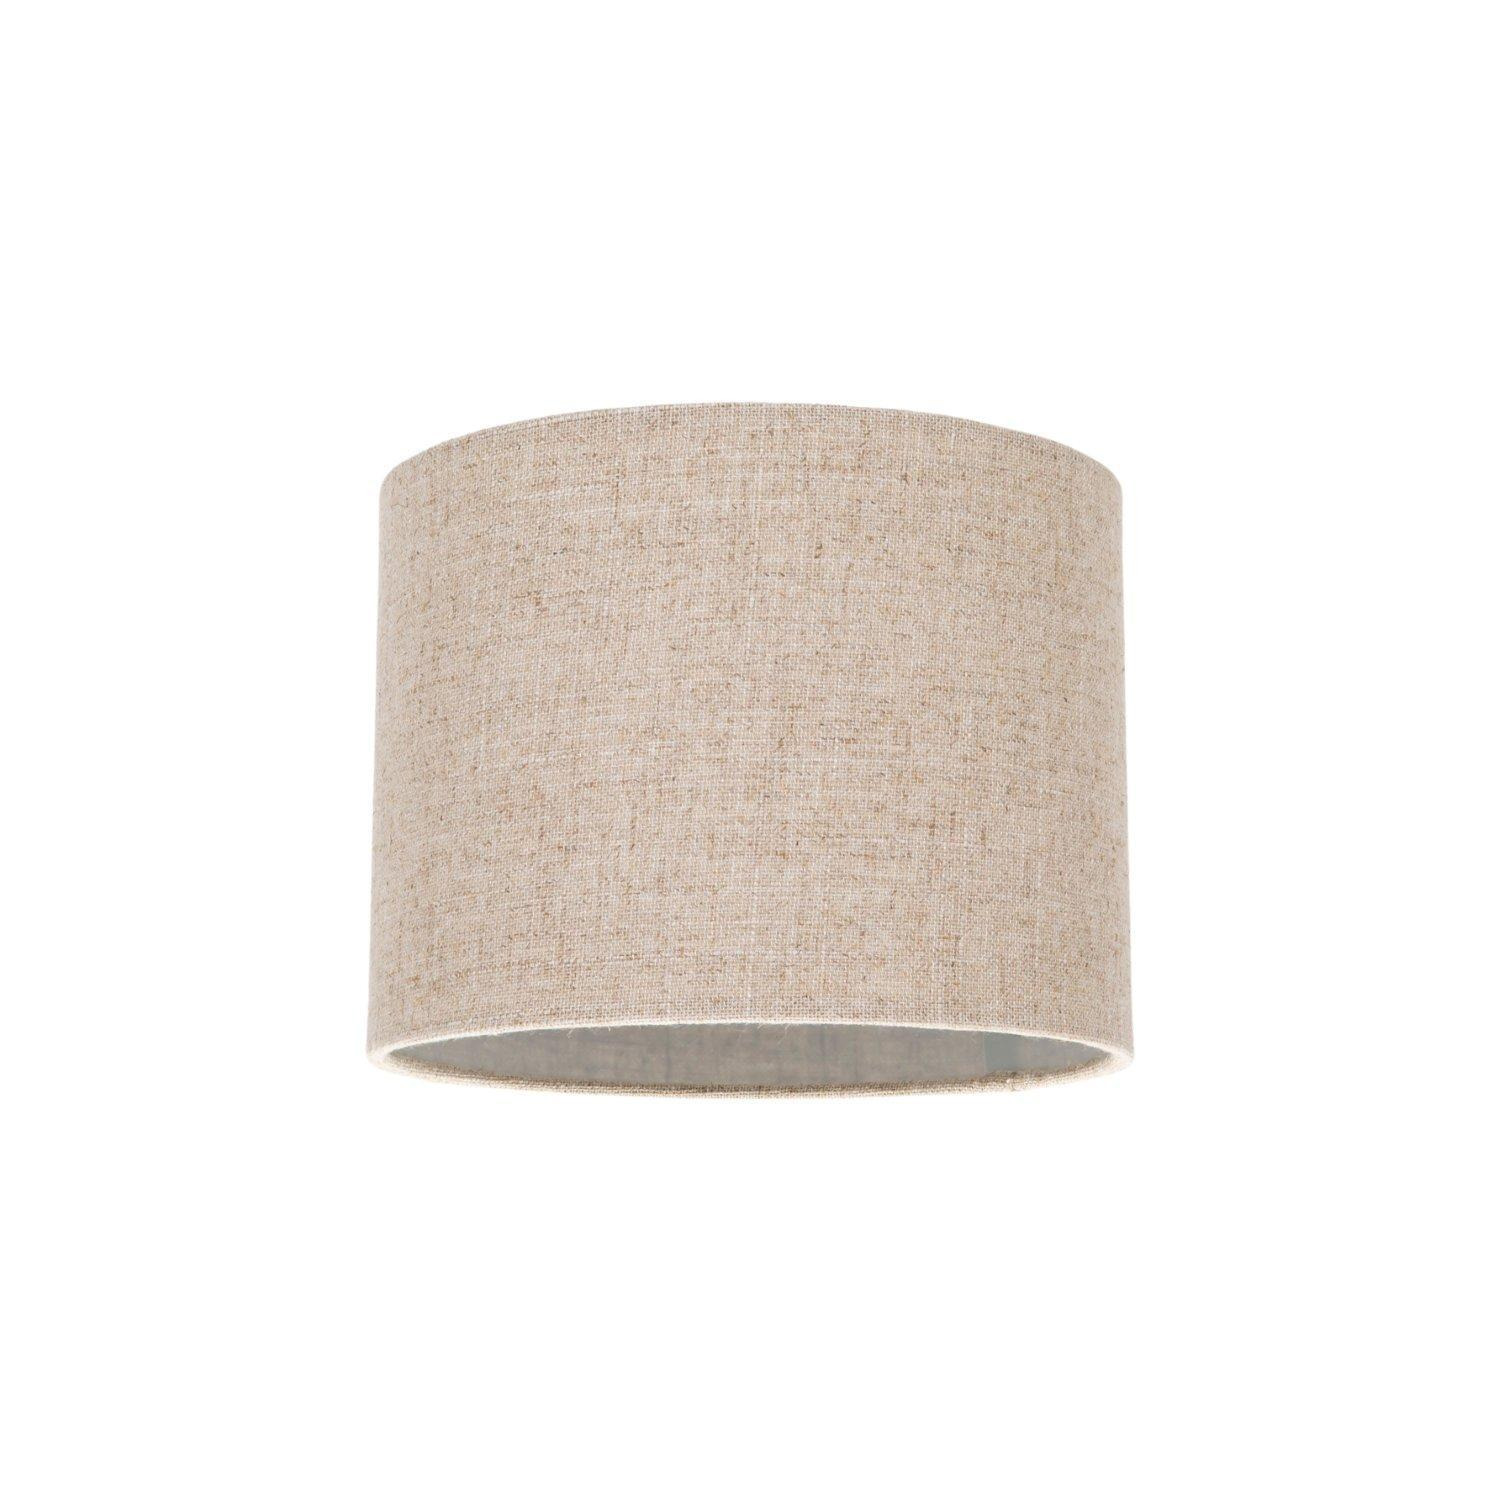 Small Round Drum Oatmeal Linen Fabric Shade - image 1